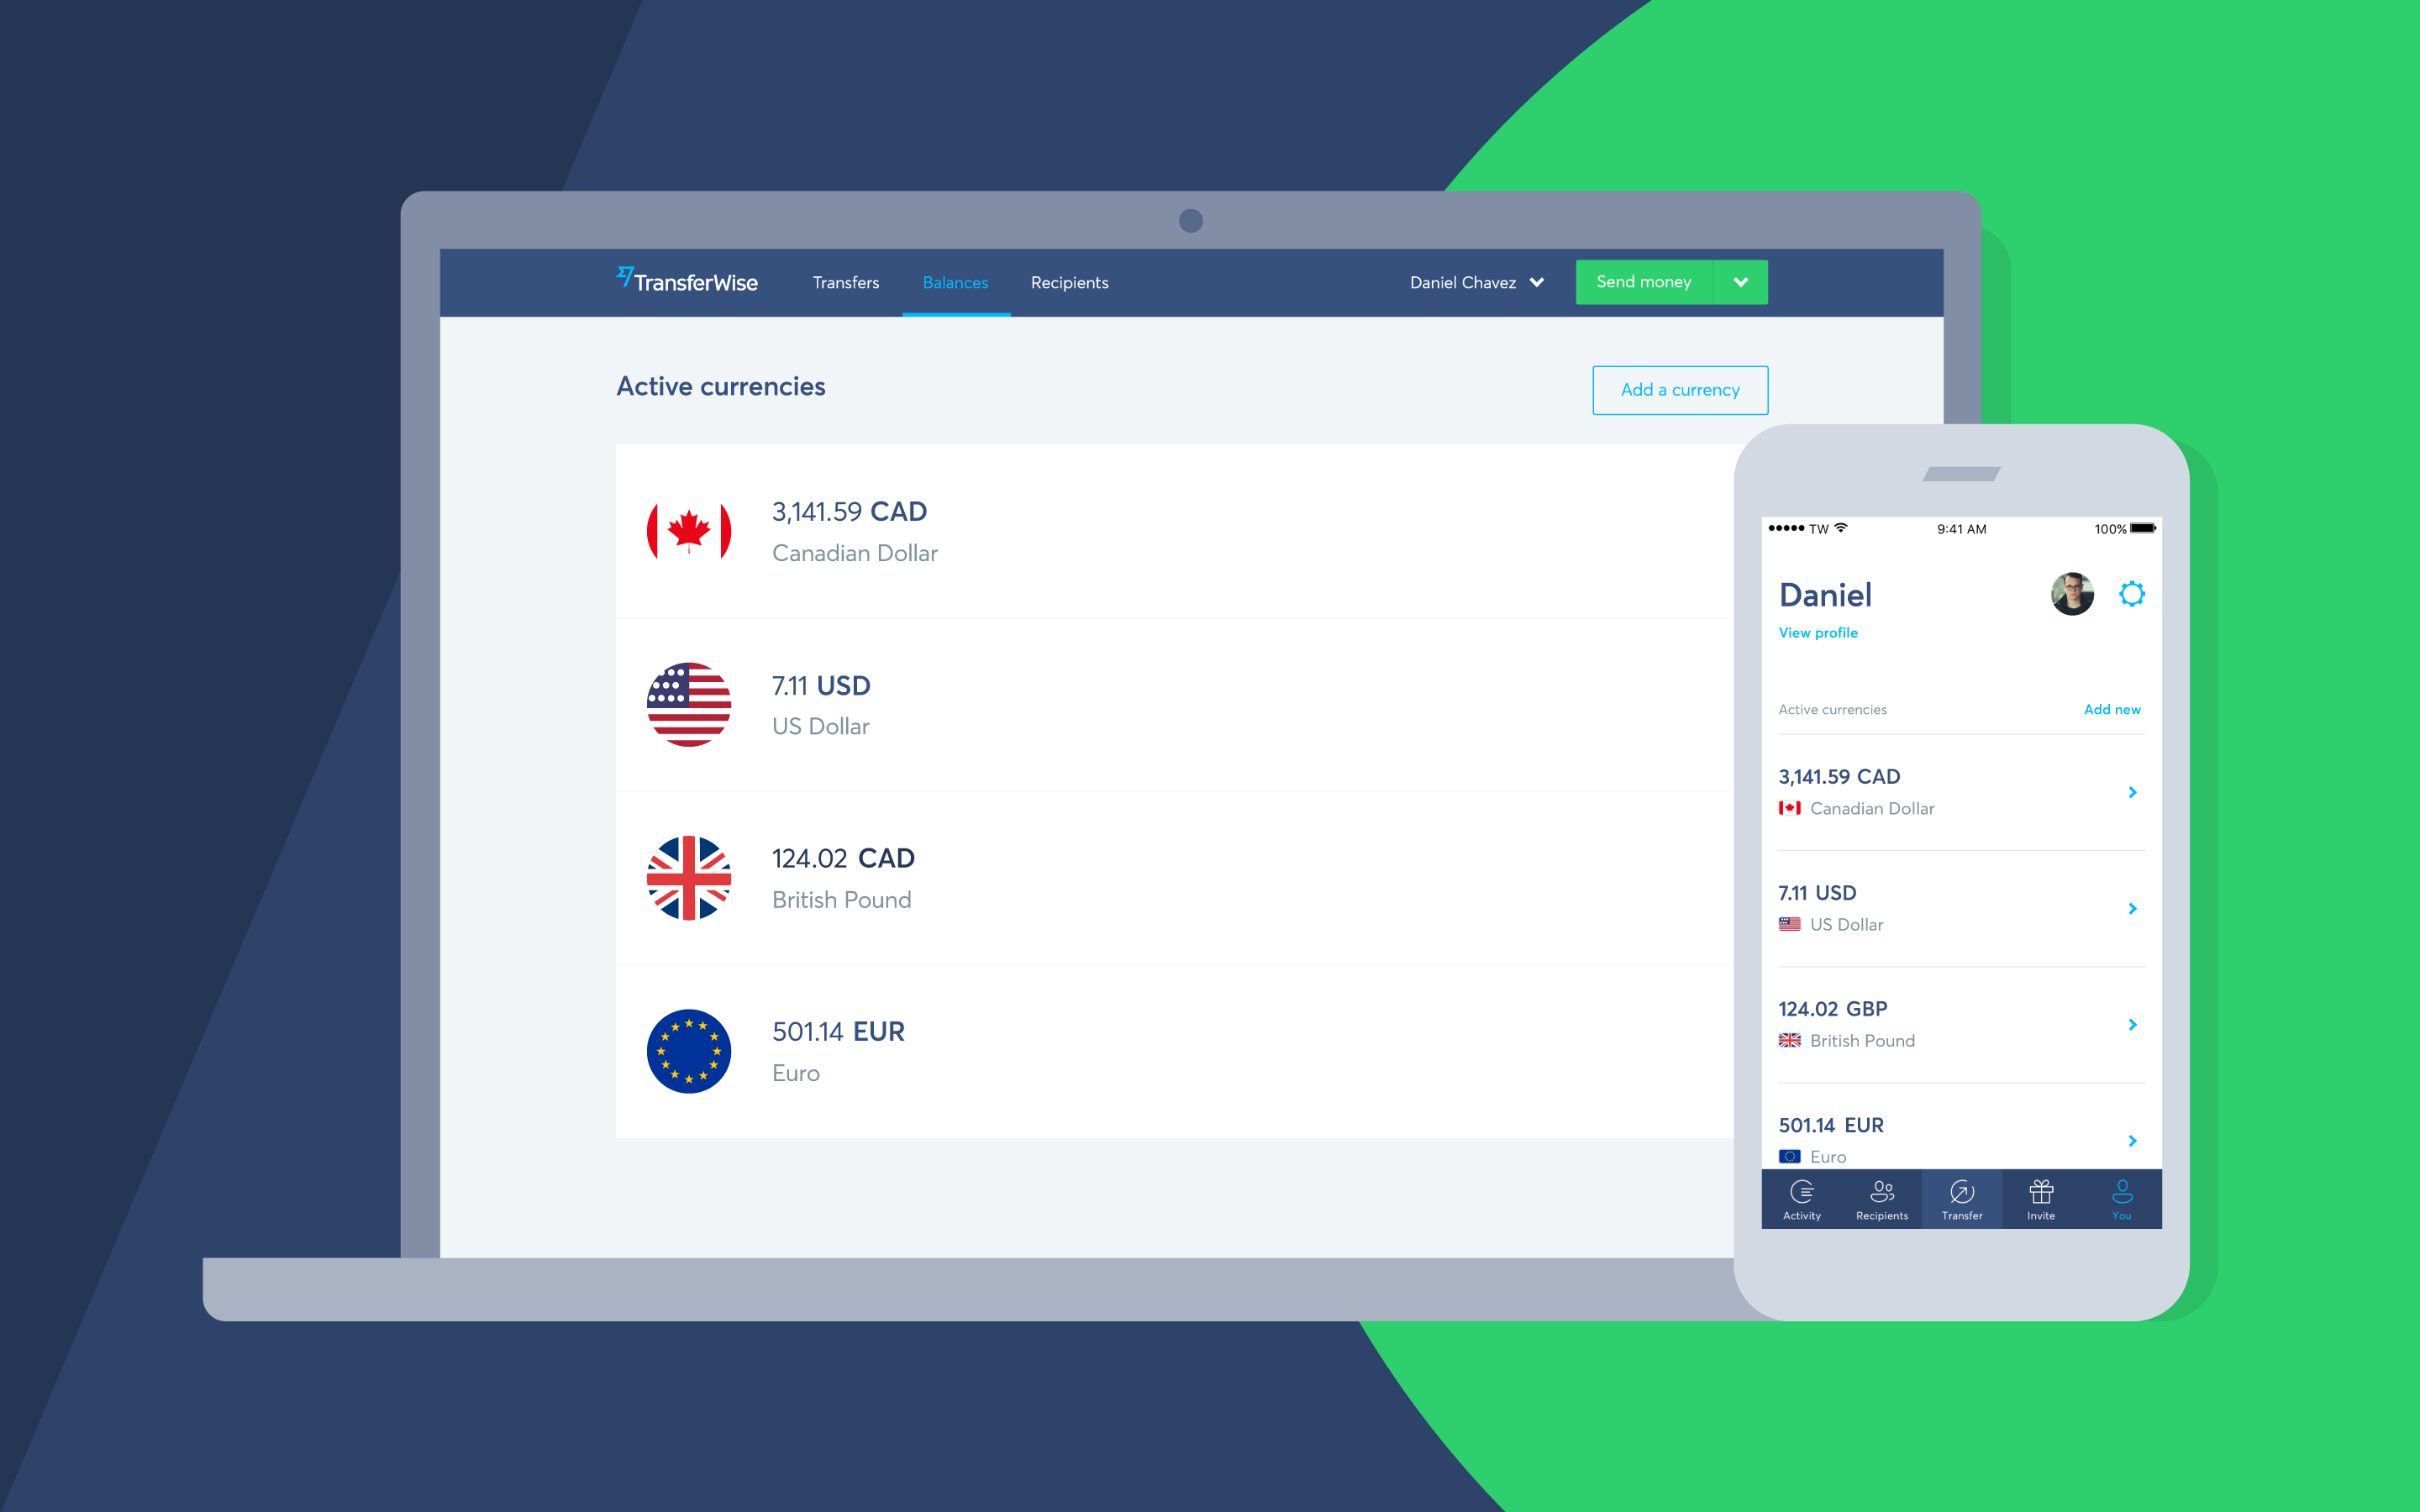 An image showing the TransferWise desktop and phone interface